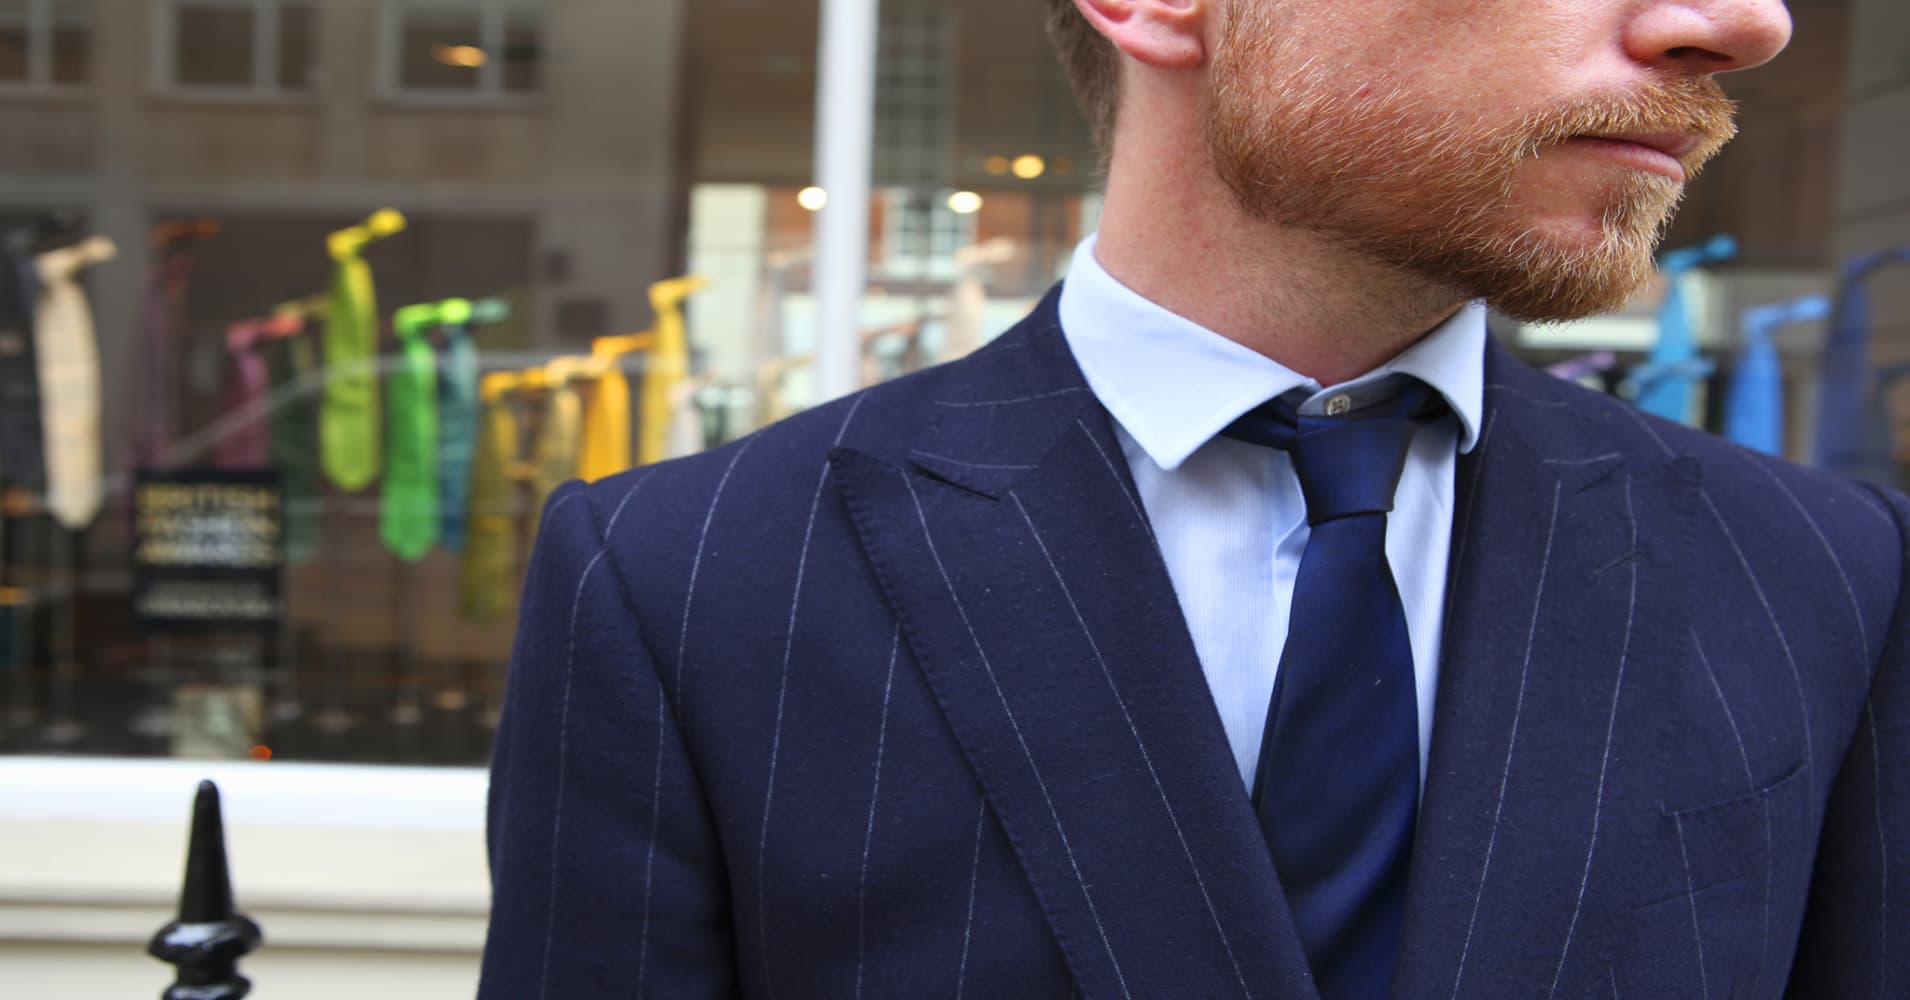 Timeless Suits From London's Savile Row Back in Fashion